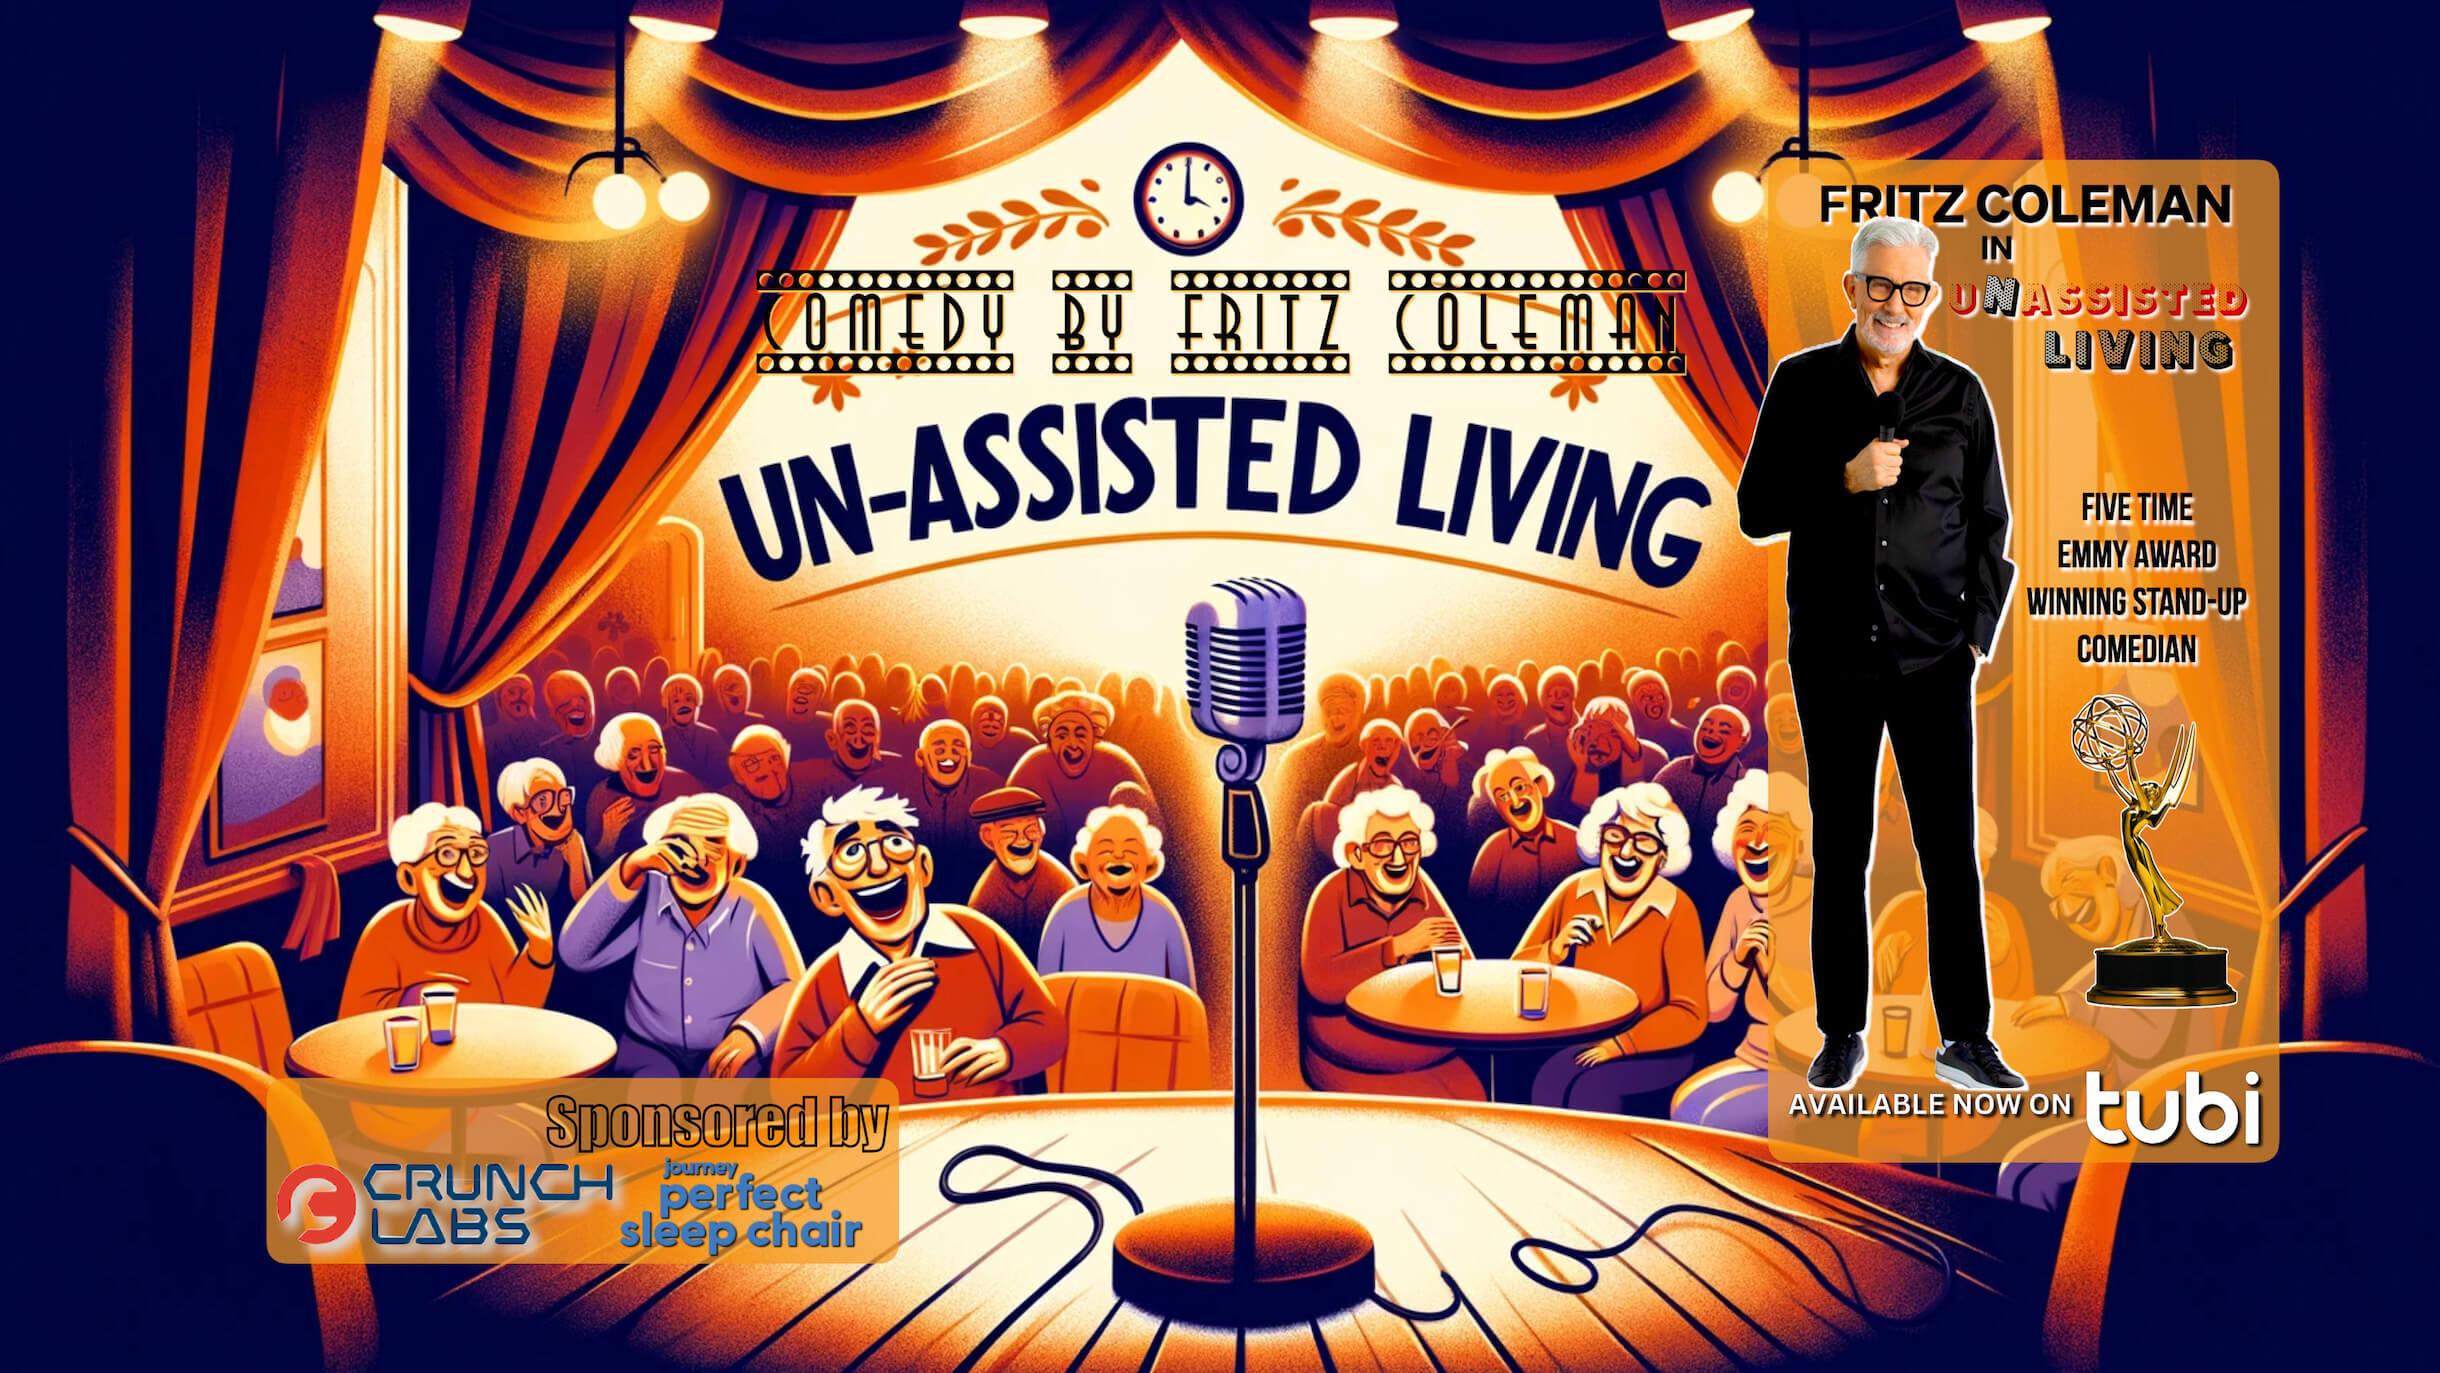 Ageless Laughter: Exploring Modern Comedy with Fritz Coleman in ‘Unassisted Living’